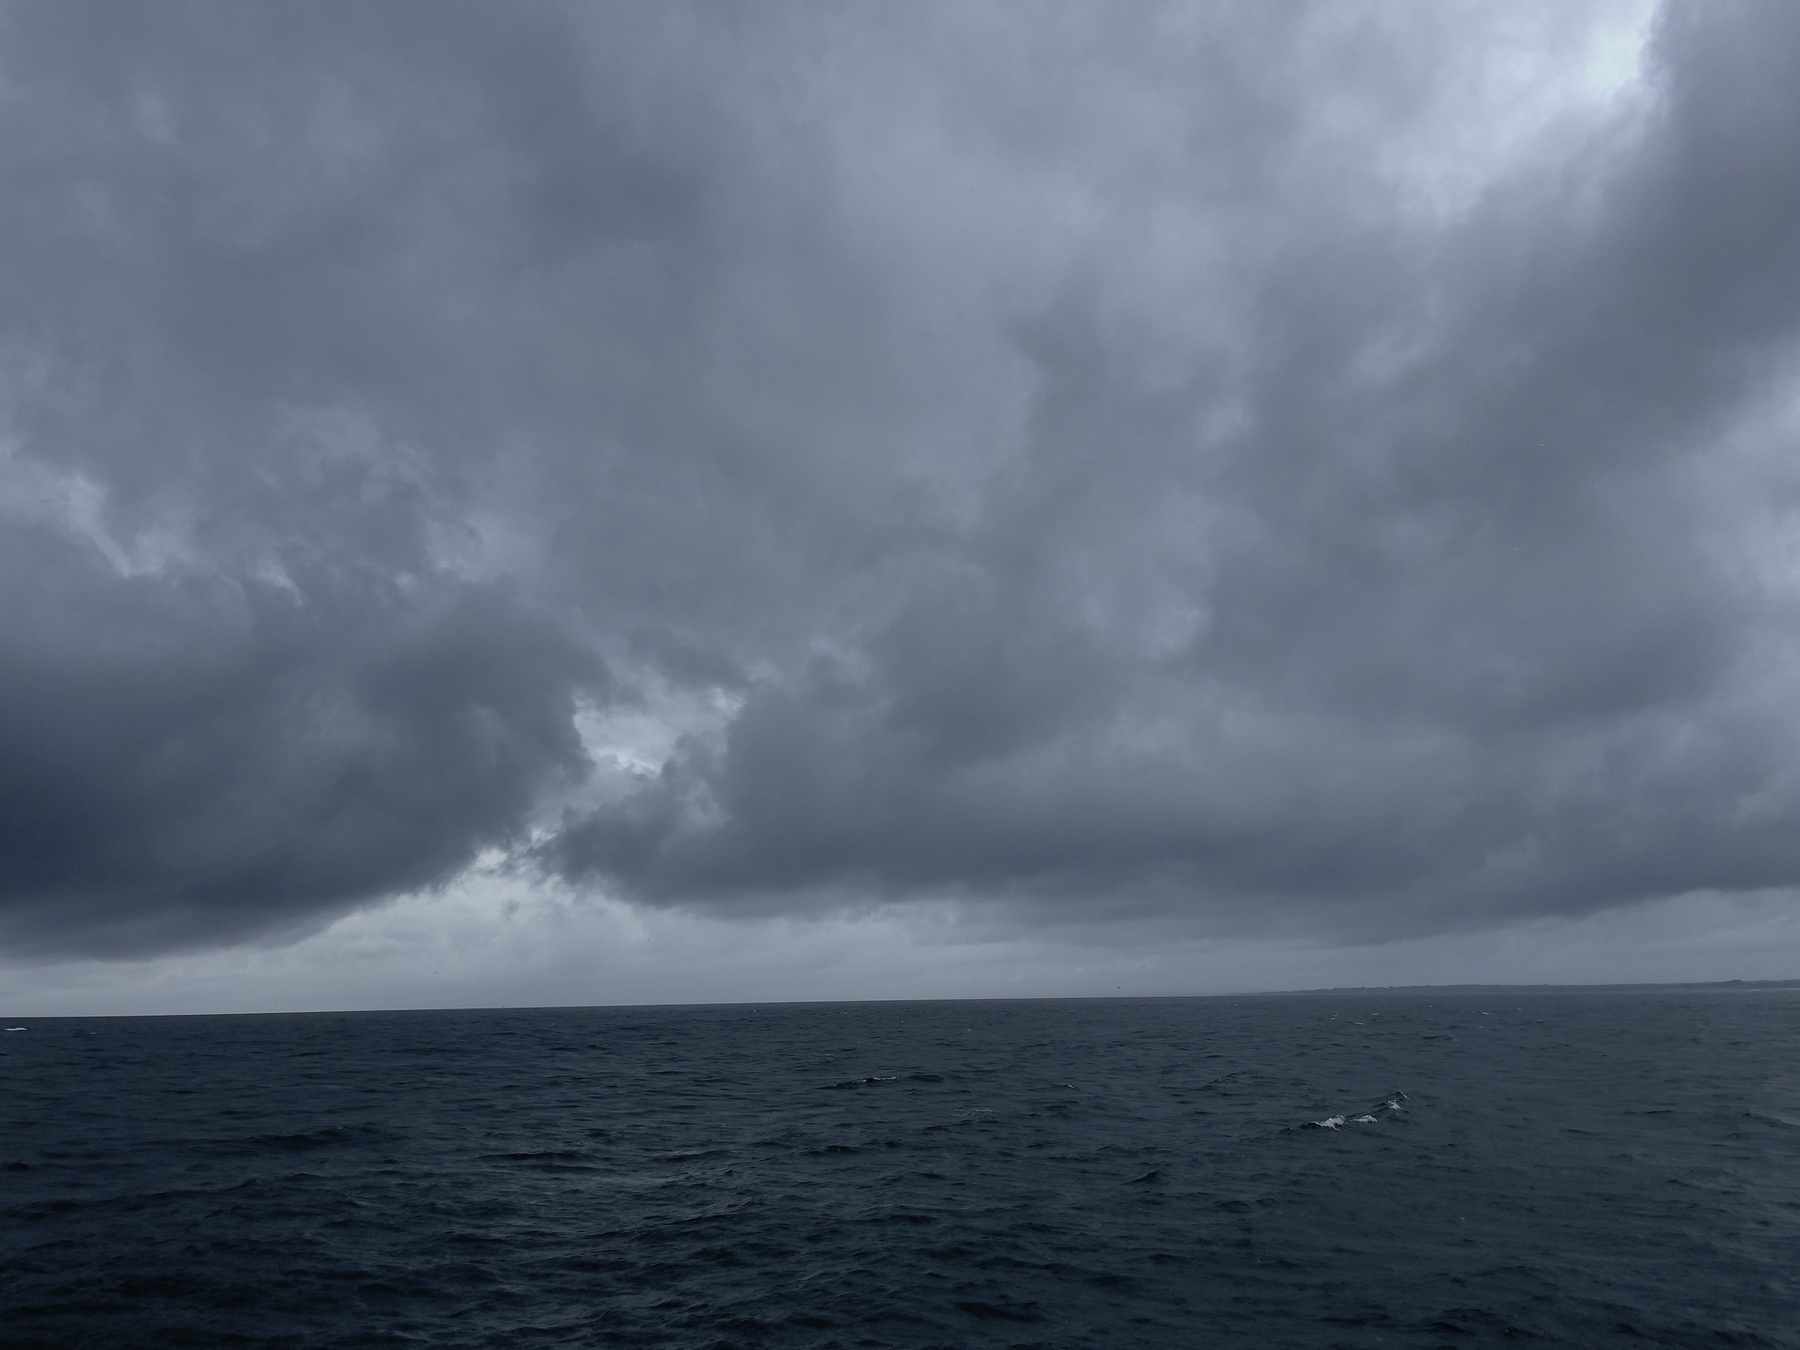 Ocean and storm clouds, horizon line tilted down to the left.